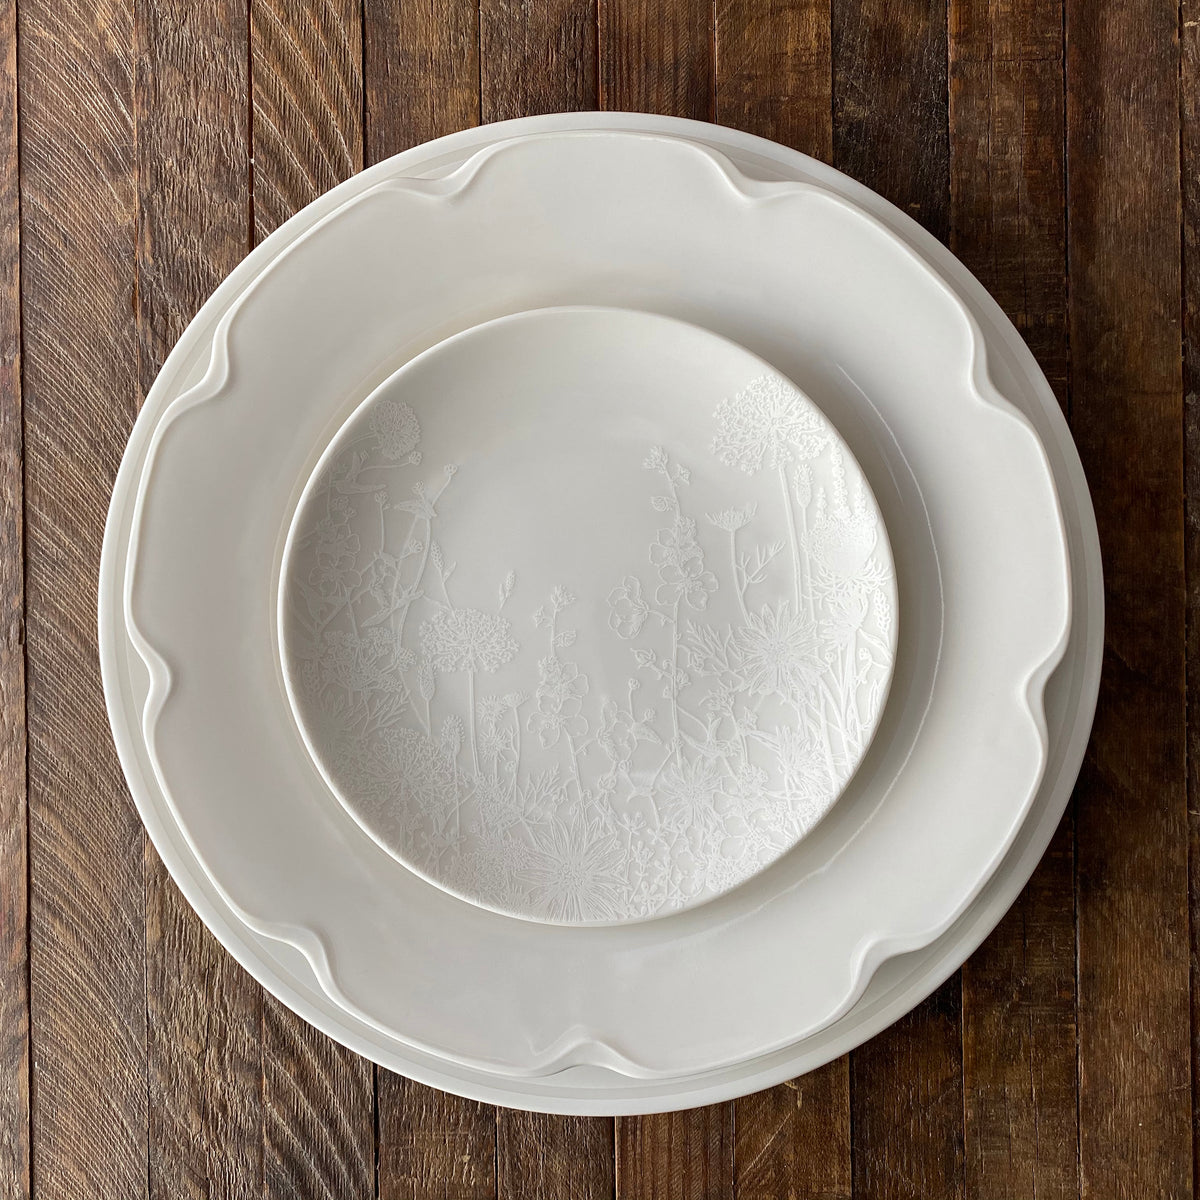 A Summer White Canapé Plates from Caskata Artisanal Home on a wooden table.